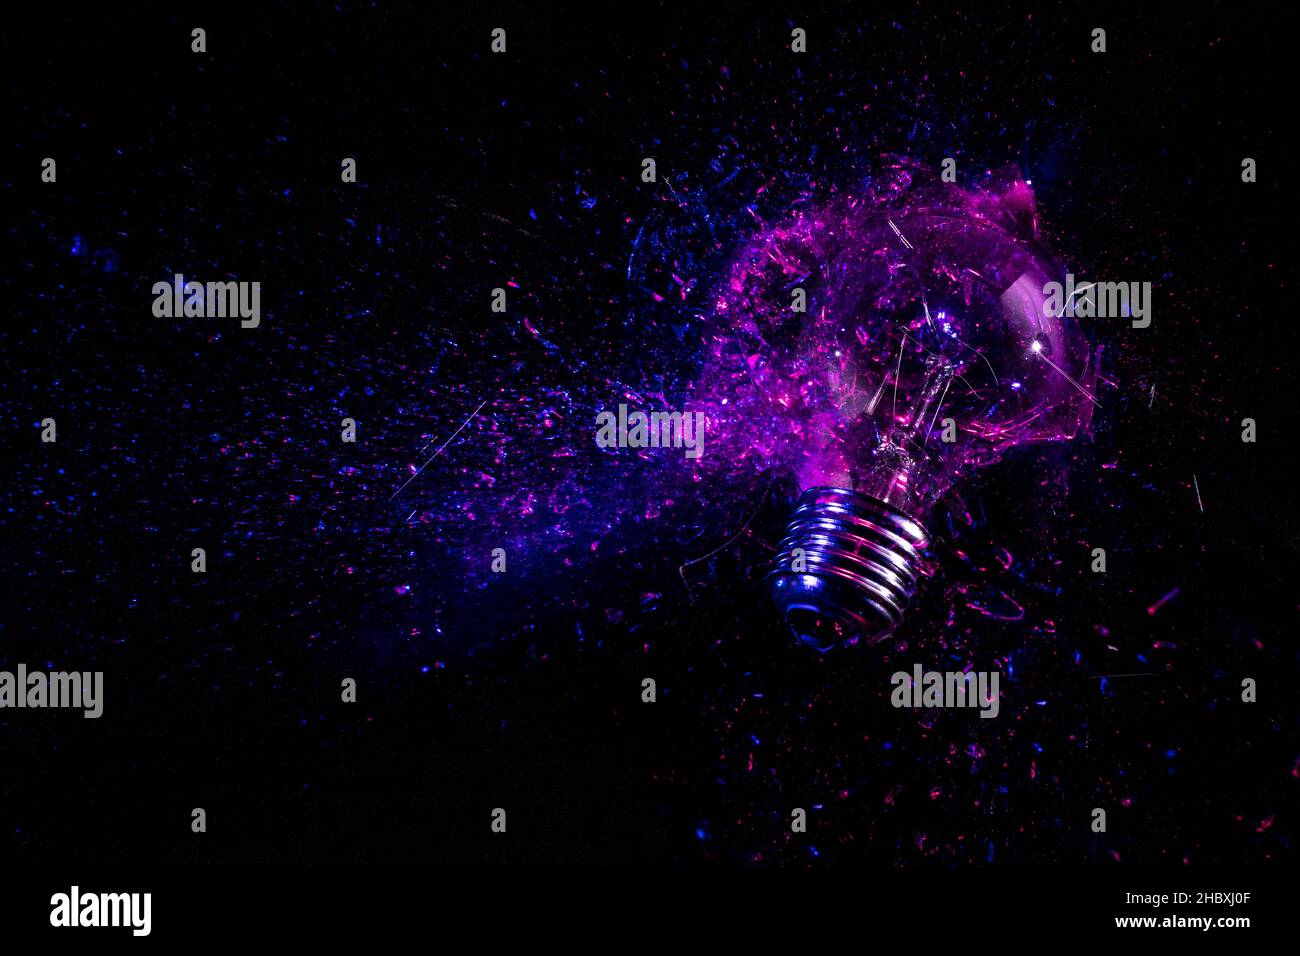 explosion of an electric light bulb on black. purple and blue light. Stock Photo